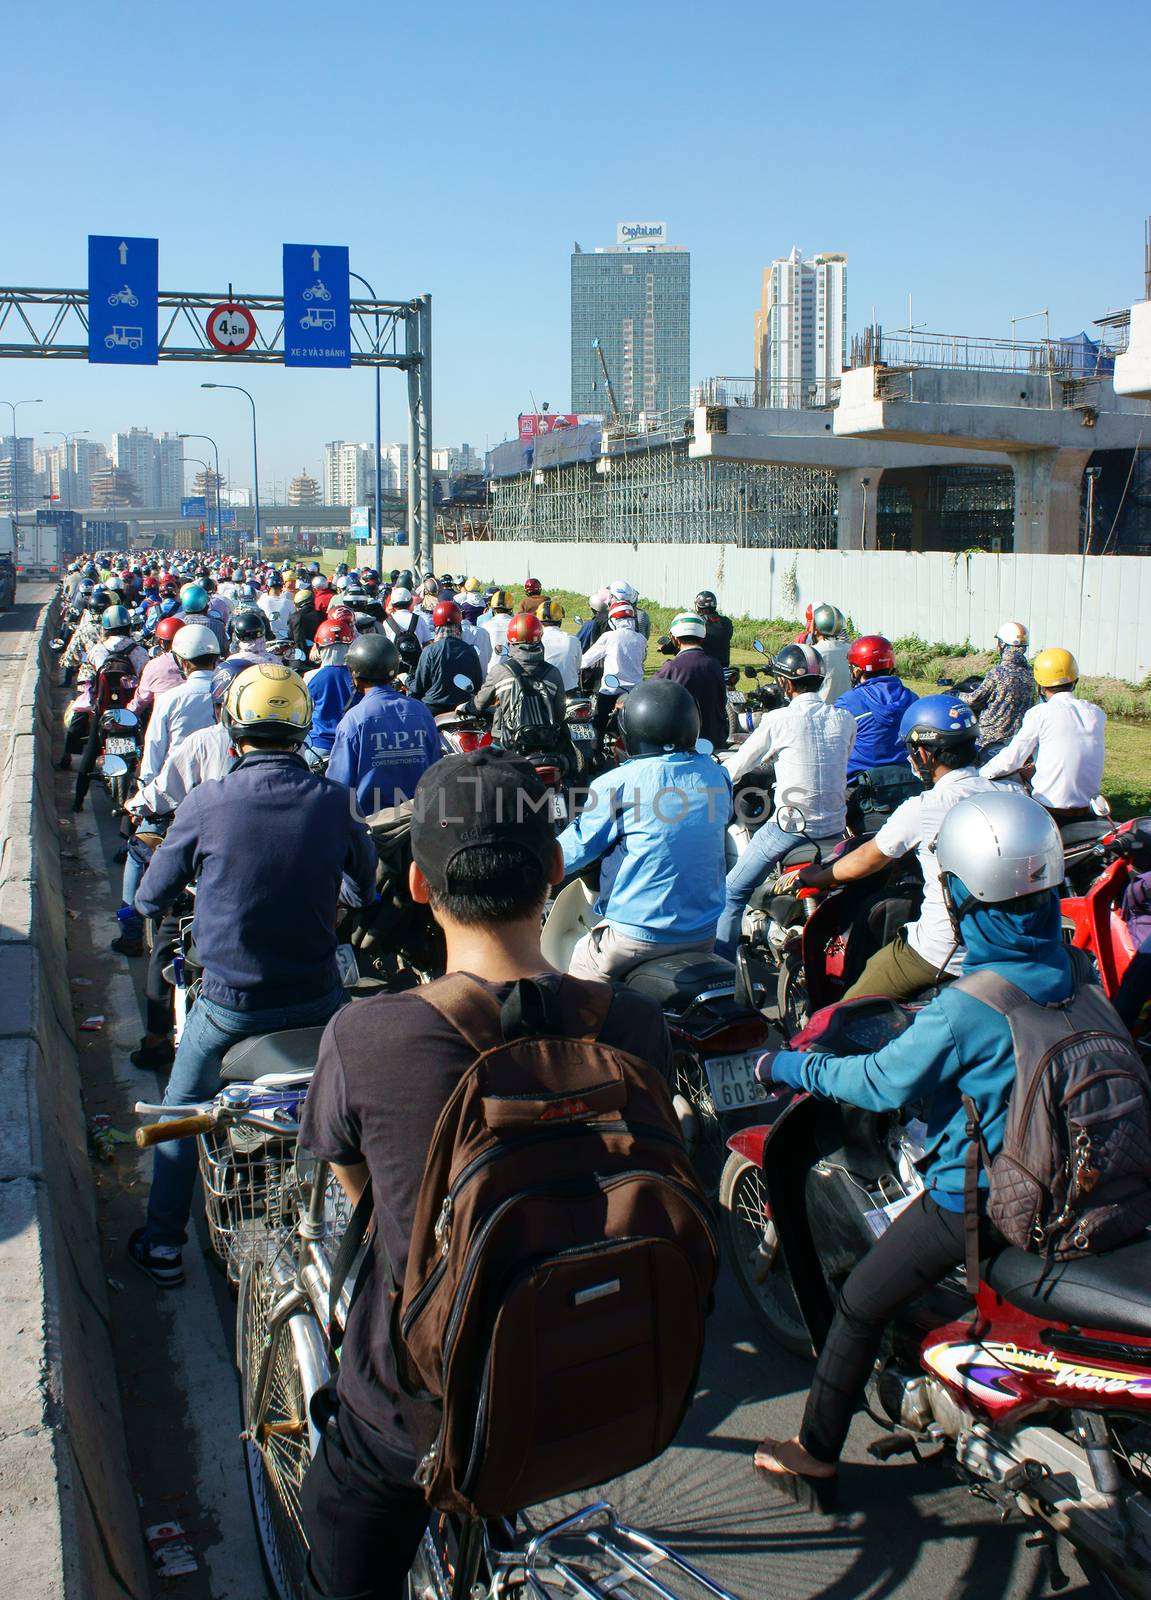 HO CHI MINH CITY, VIET NAM- NOV 19: Crowded situation on rush hour of Asian city, motorbikes in traffic jam, development make pressure on infrastucture, dusty, CO2, exhaust fumes, Vietnam, Nov19, 2015